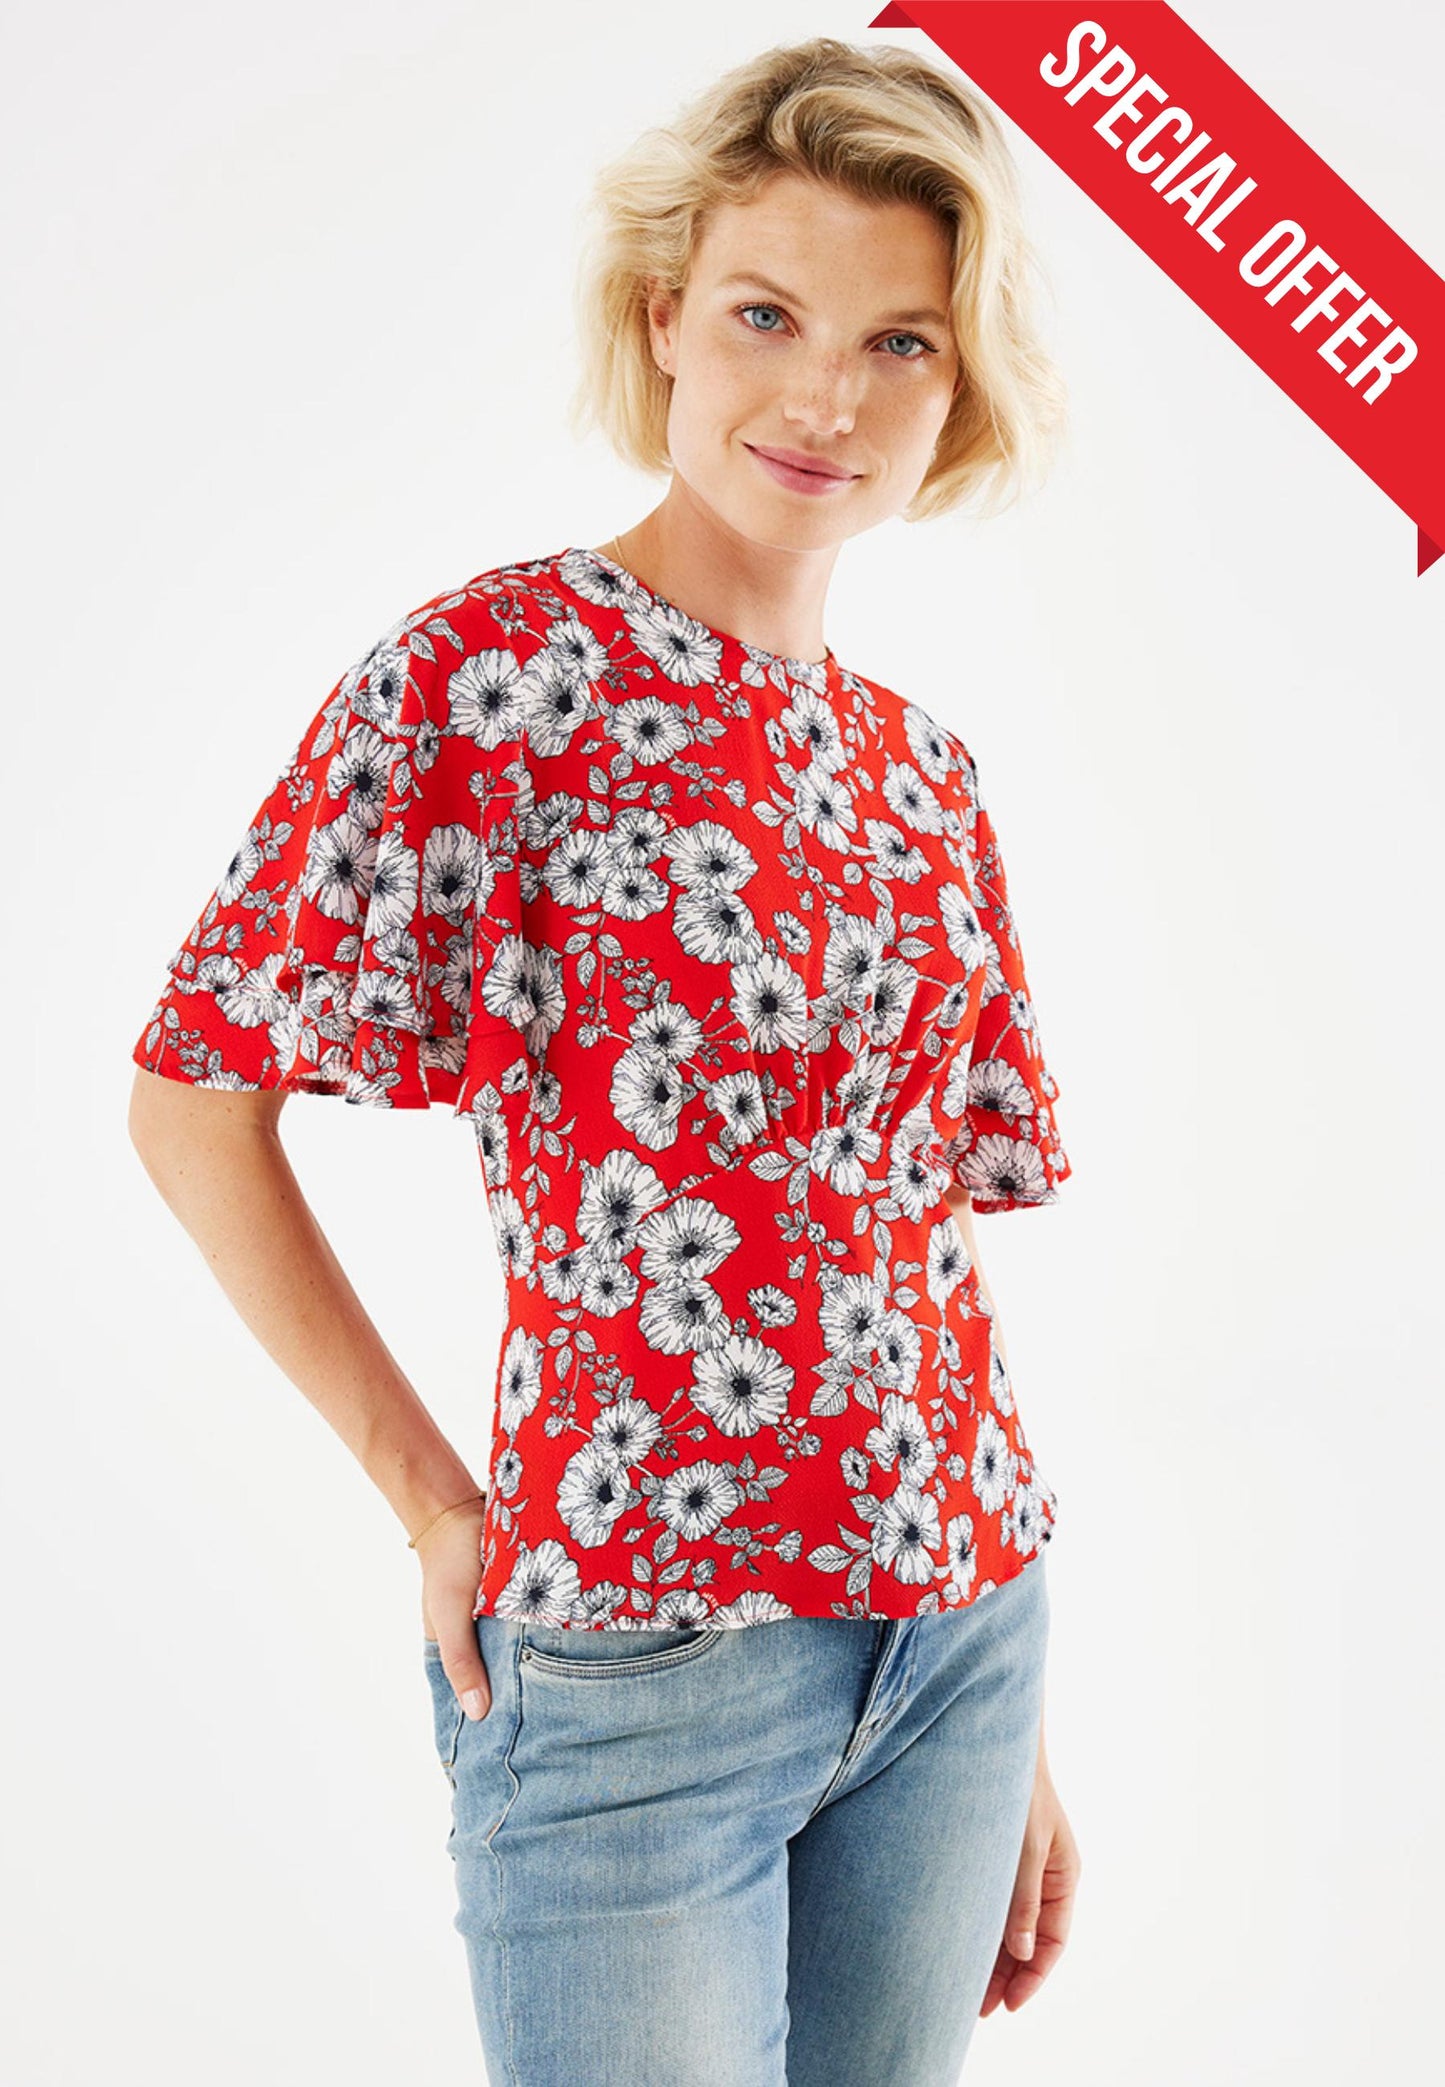 Women's Floral Blouse with All-Over Print